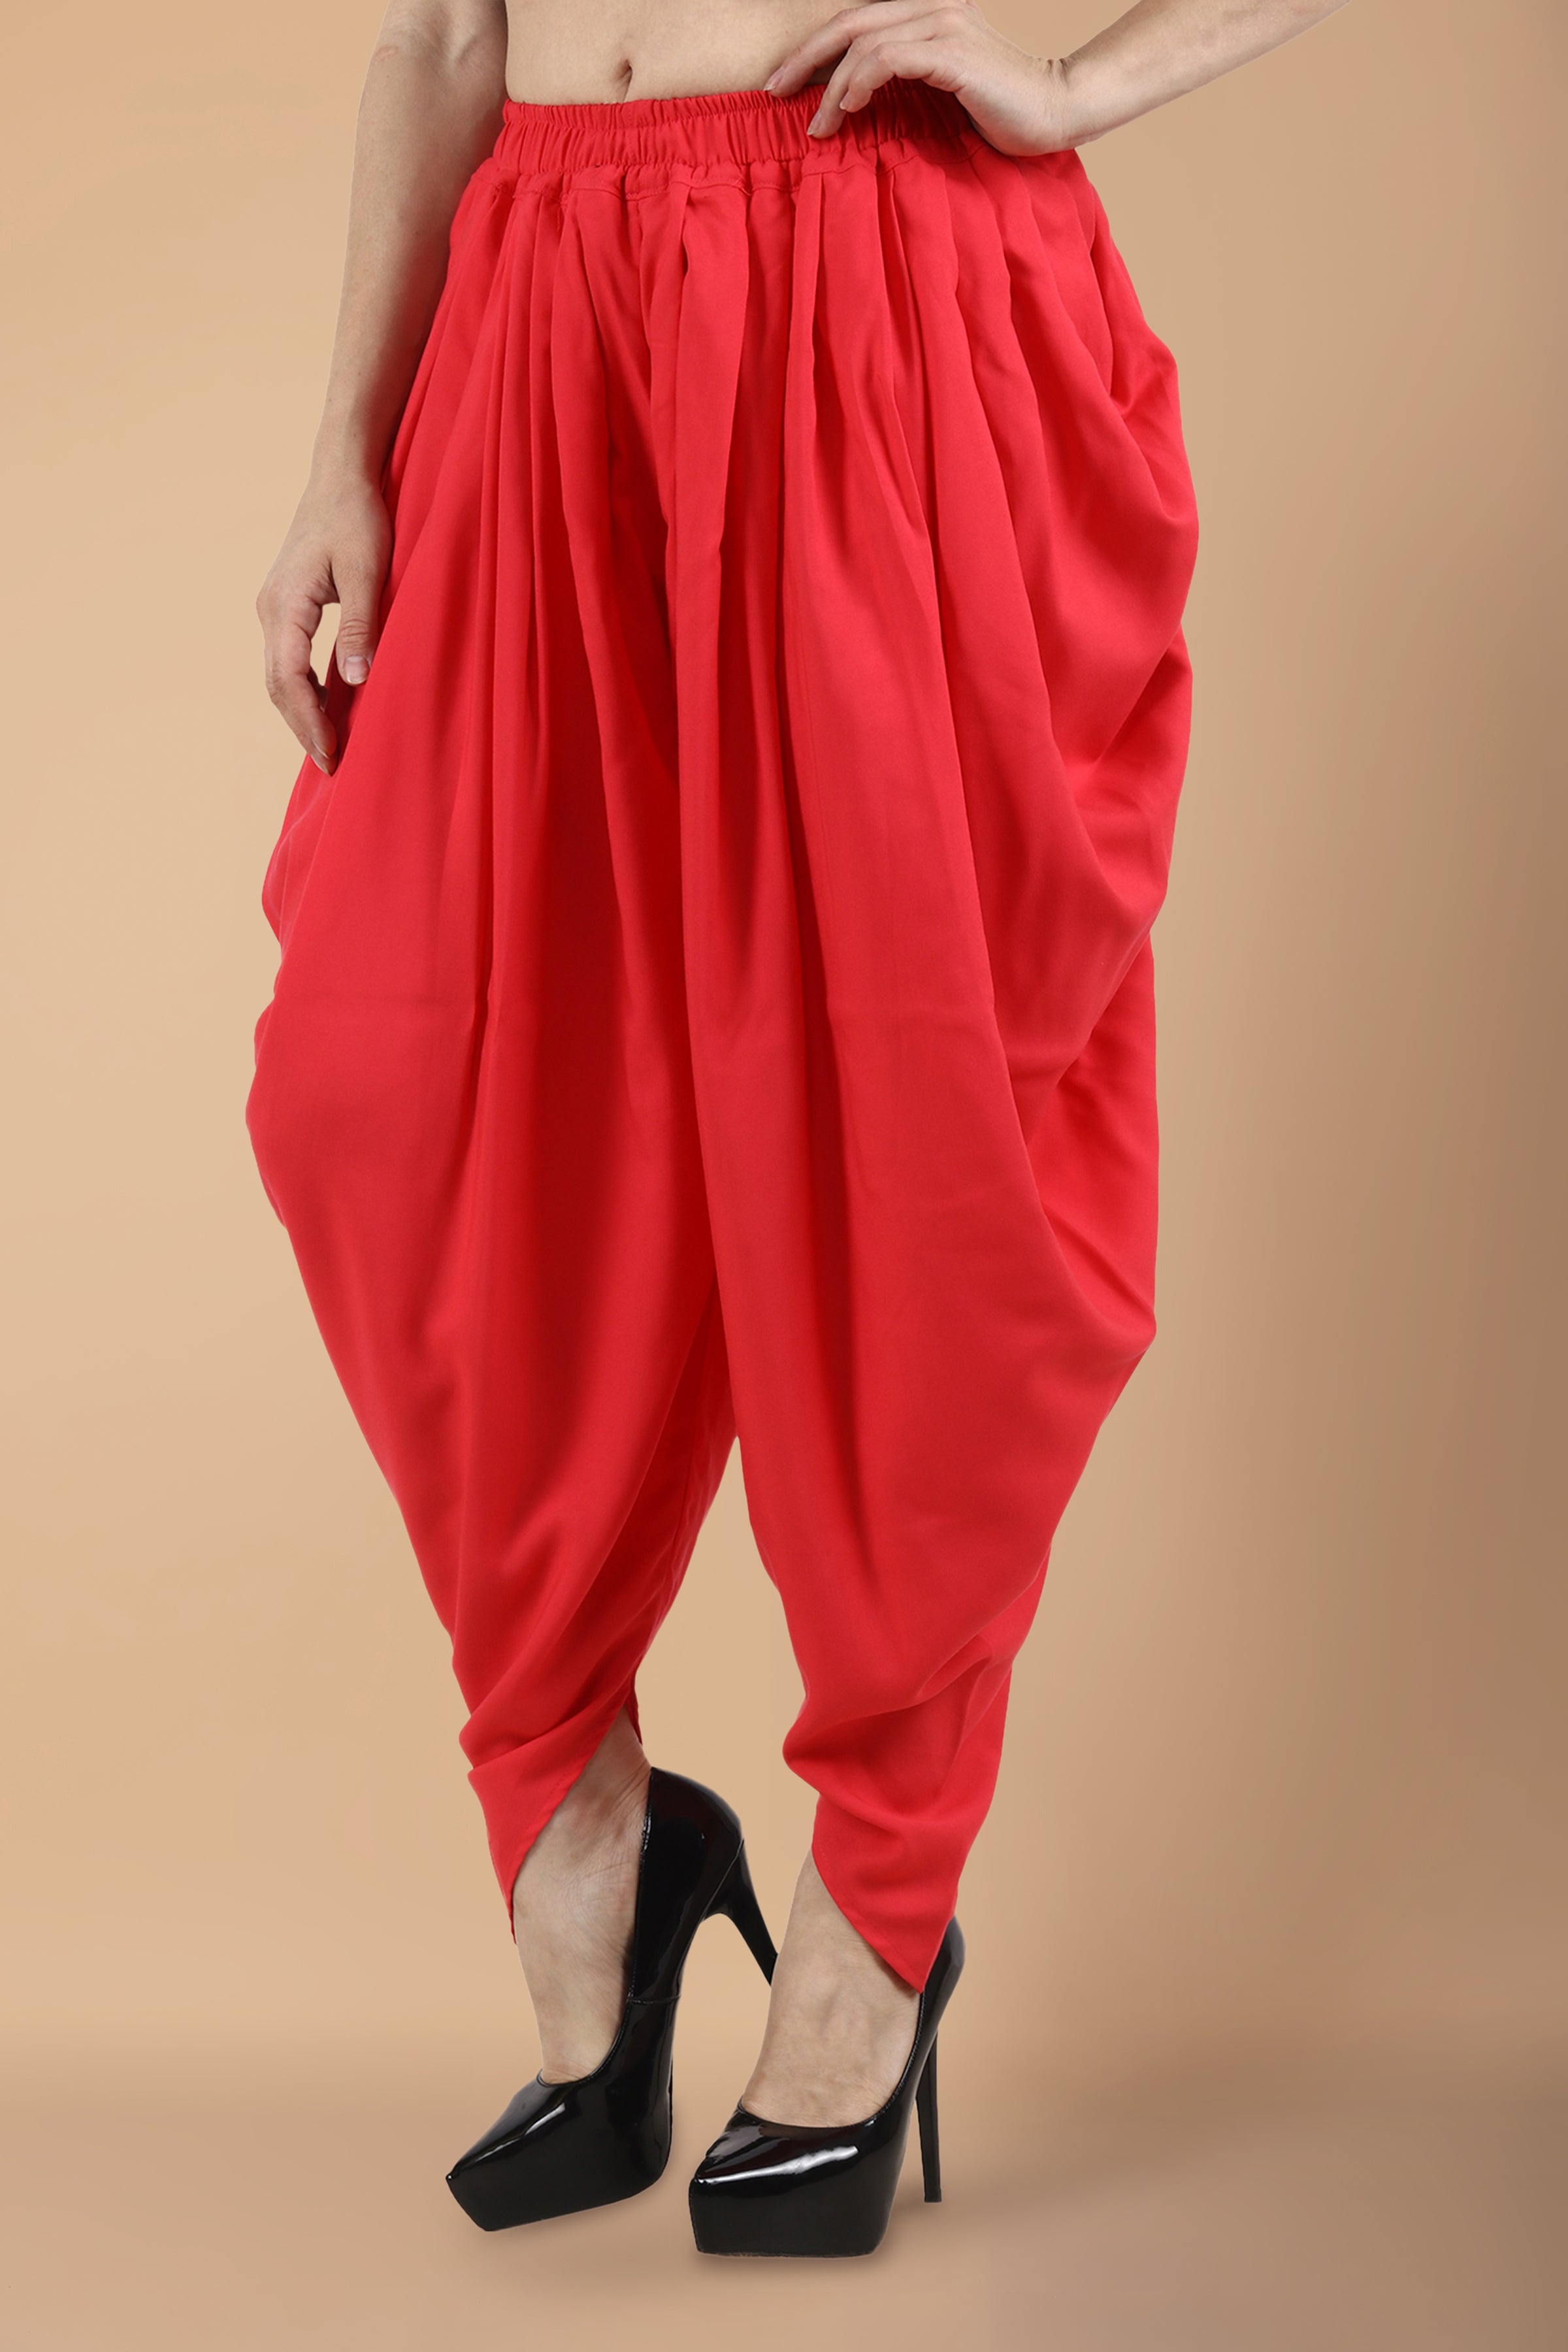 Buy online Pink Rayon Dhoti Salwar Salwars from Churidars  Salwars for  Women by Clora Creation for 929 at 15 off  2023 Limeroadcom